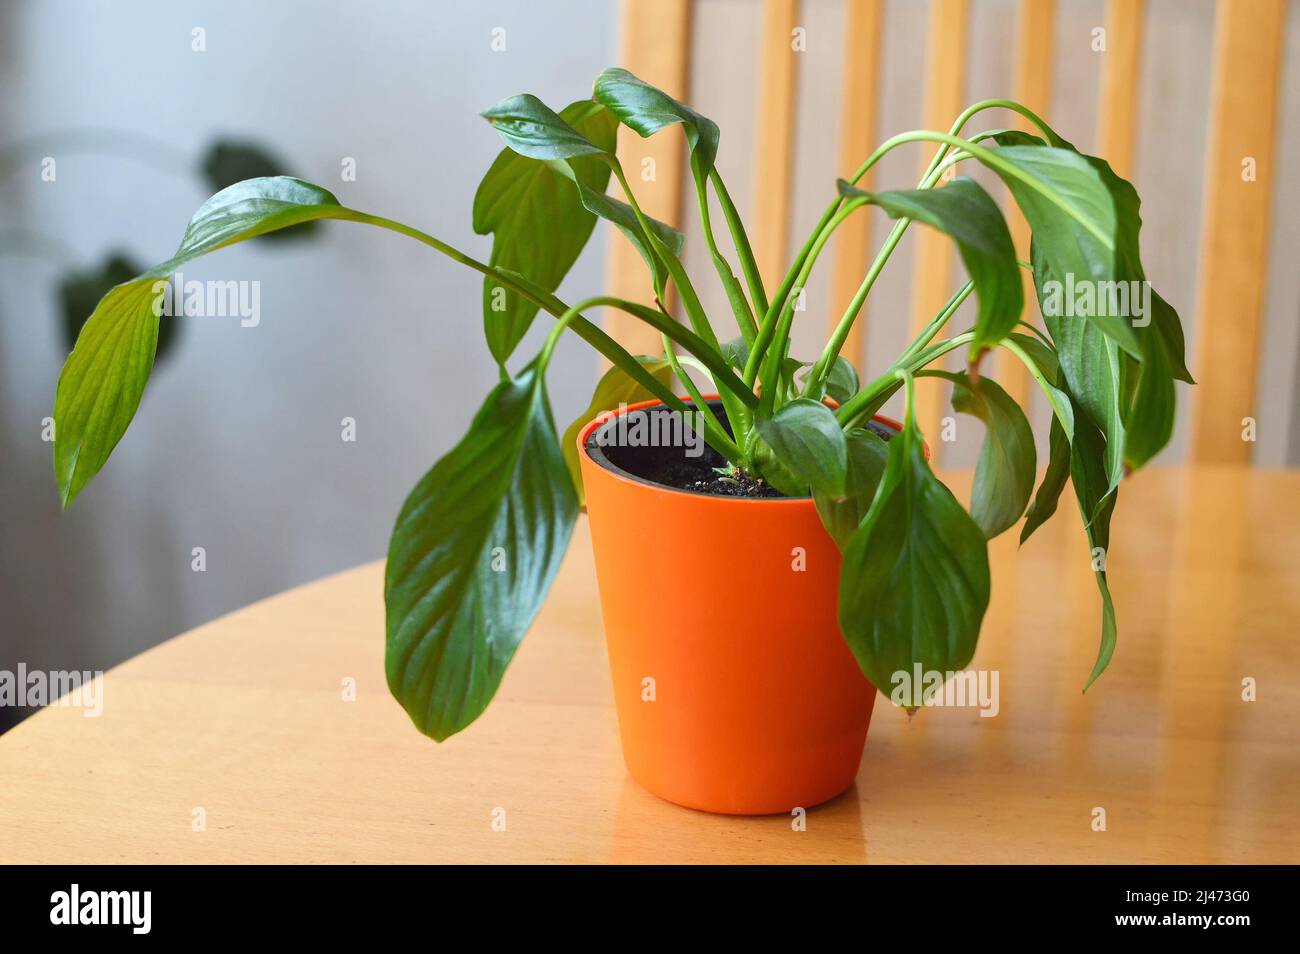 Wilting peace lily (Spathiphyllum) in a pot Stock Photo